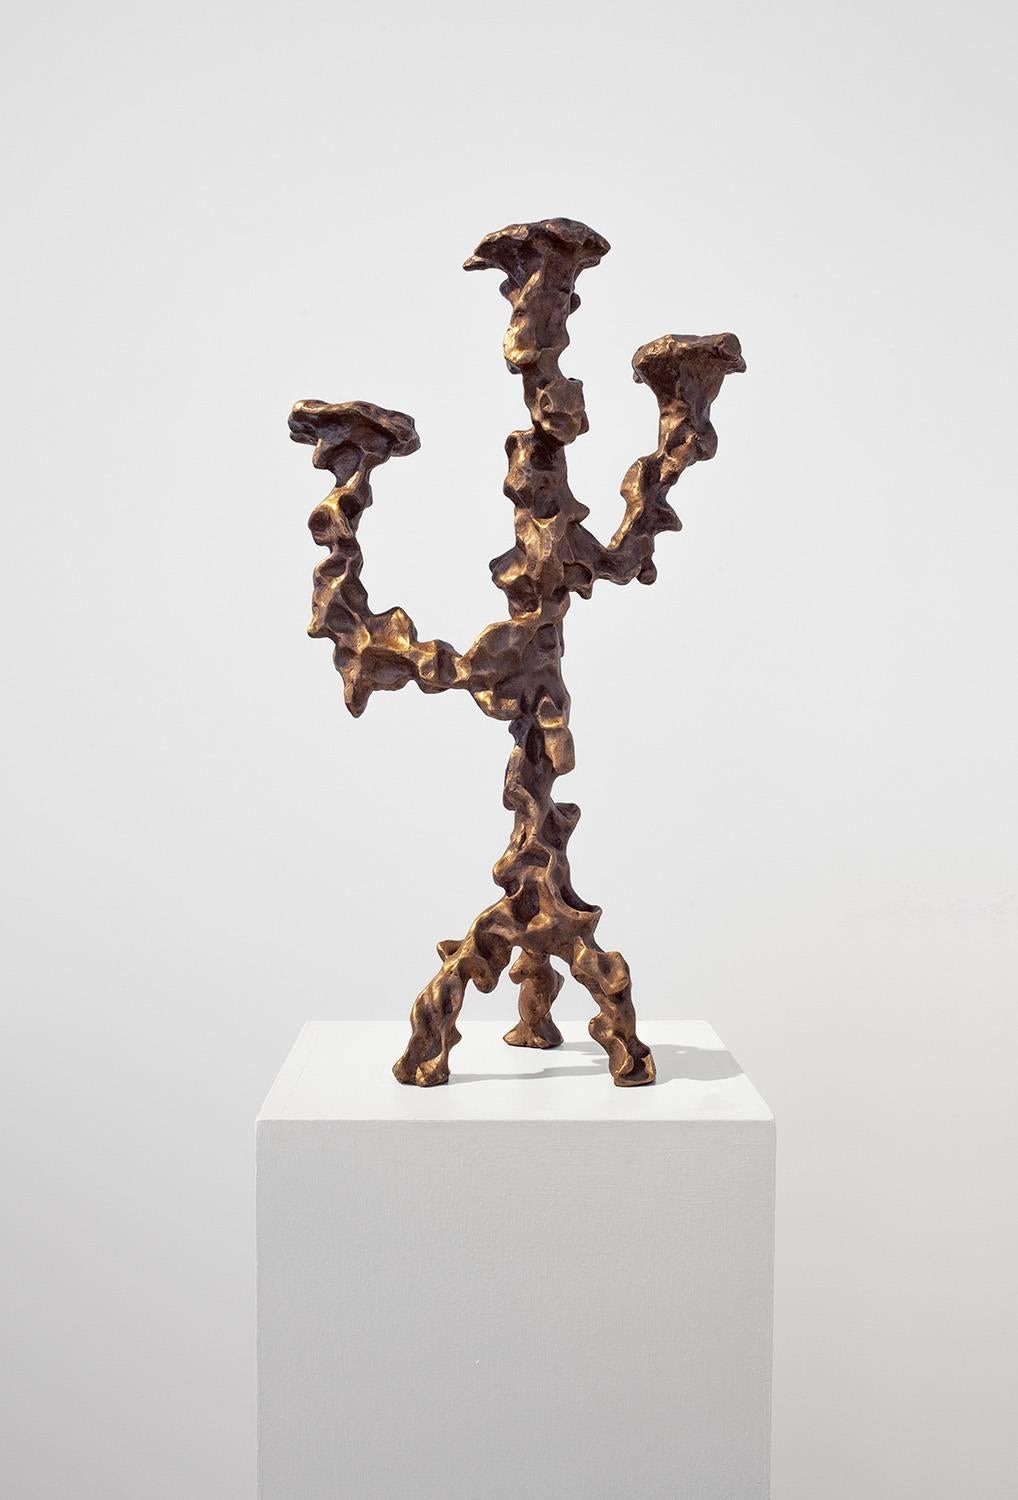 Mattia Bonetti
Candelabrum 'Grotto,' 
2014.
Bronze, patinated.
Measures: H 47 x L 26 x D15 cm / H 18.5 x L 10.2 x D 5.9 in.
David Gill Gallery
For EU buyers this piece is subject to a 20% VAT tax, which will be added to the price after the order has